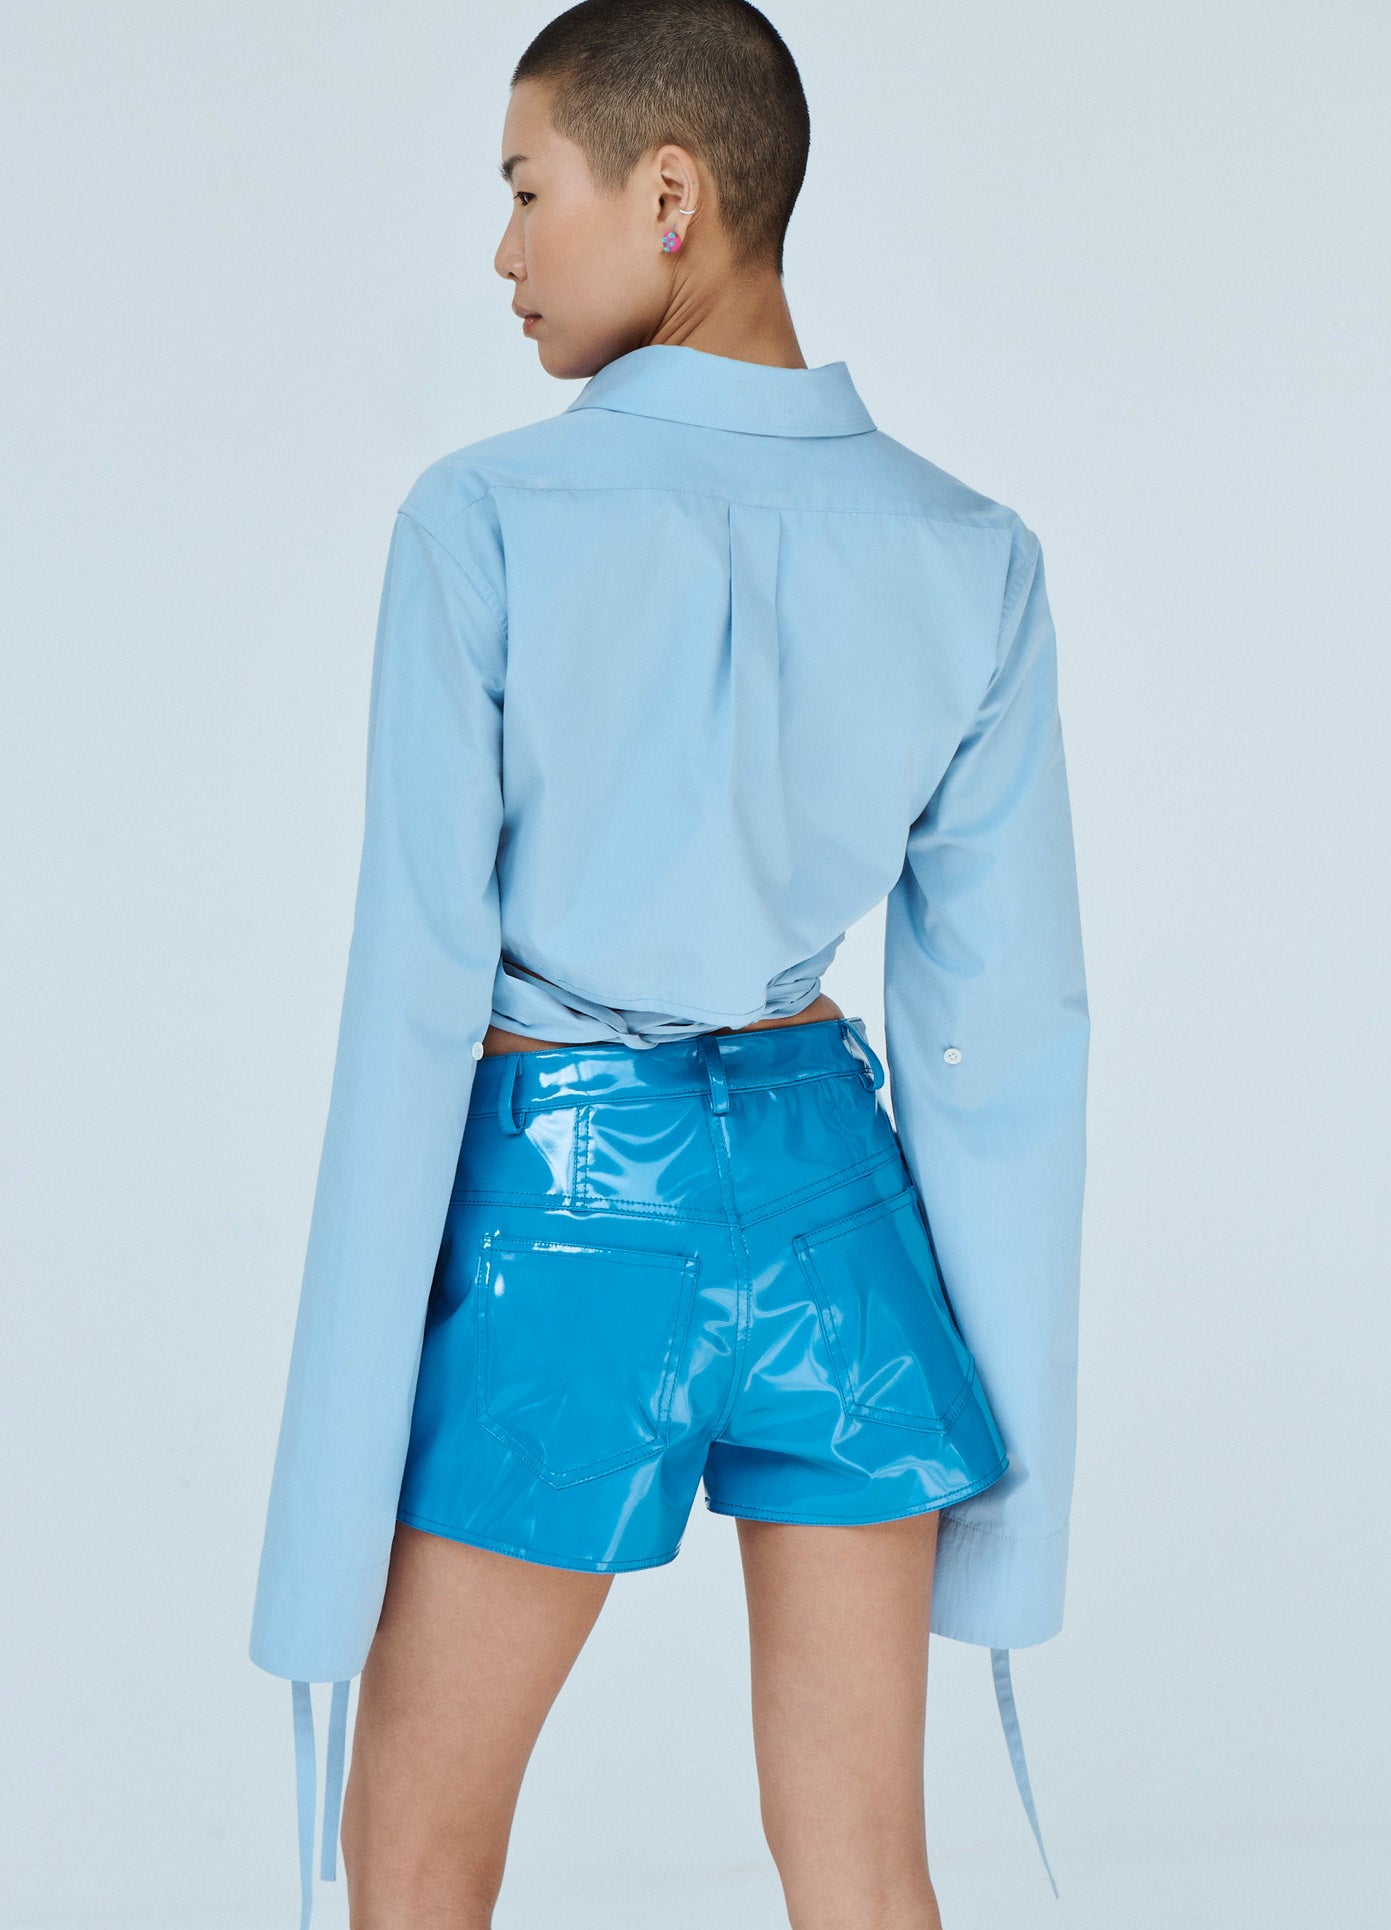 MONSE Cropped X Long Sleeve Shirt in Blue on Model Back Detail View